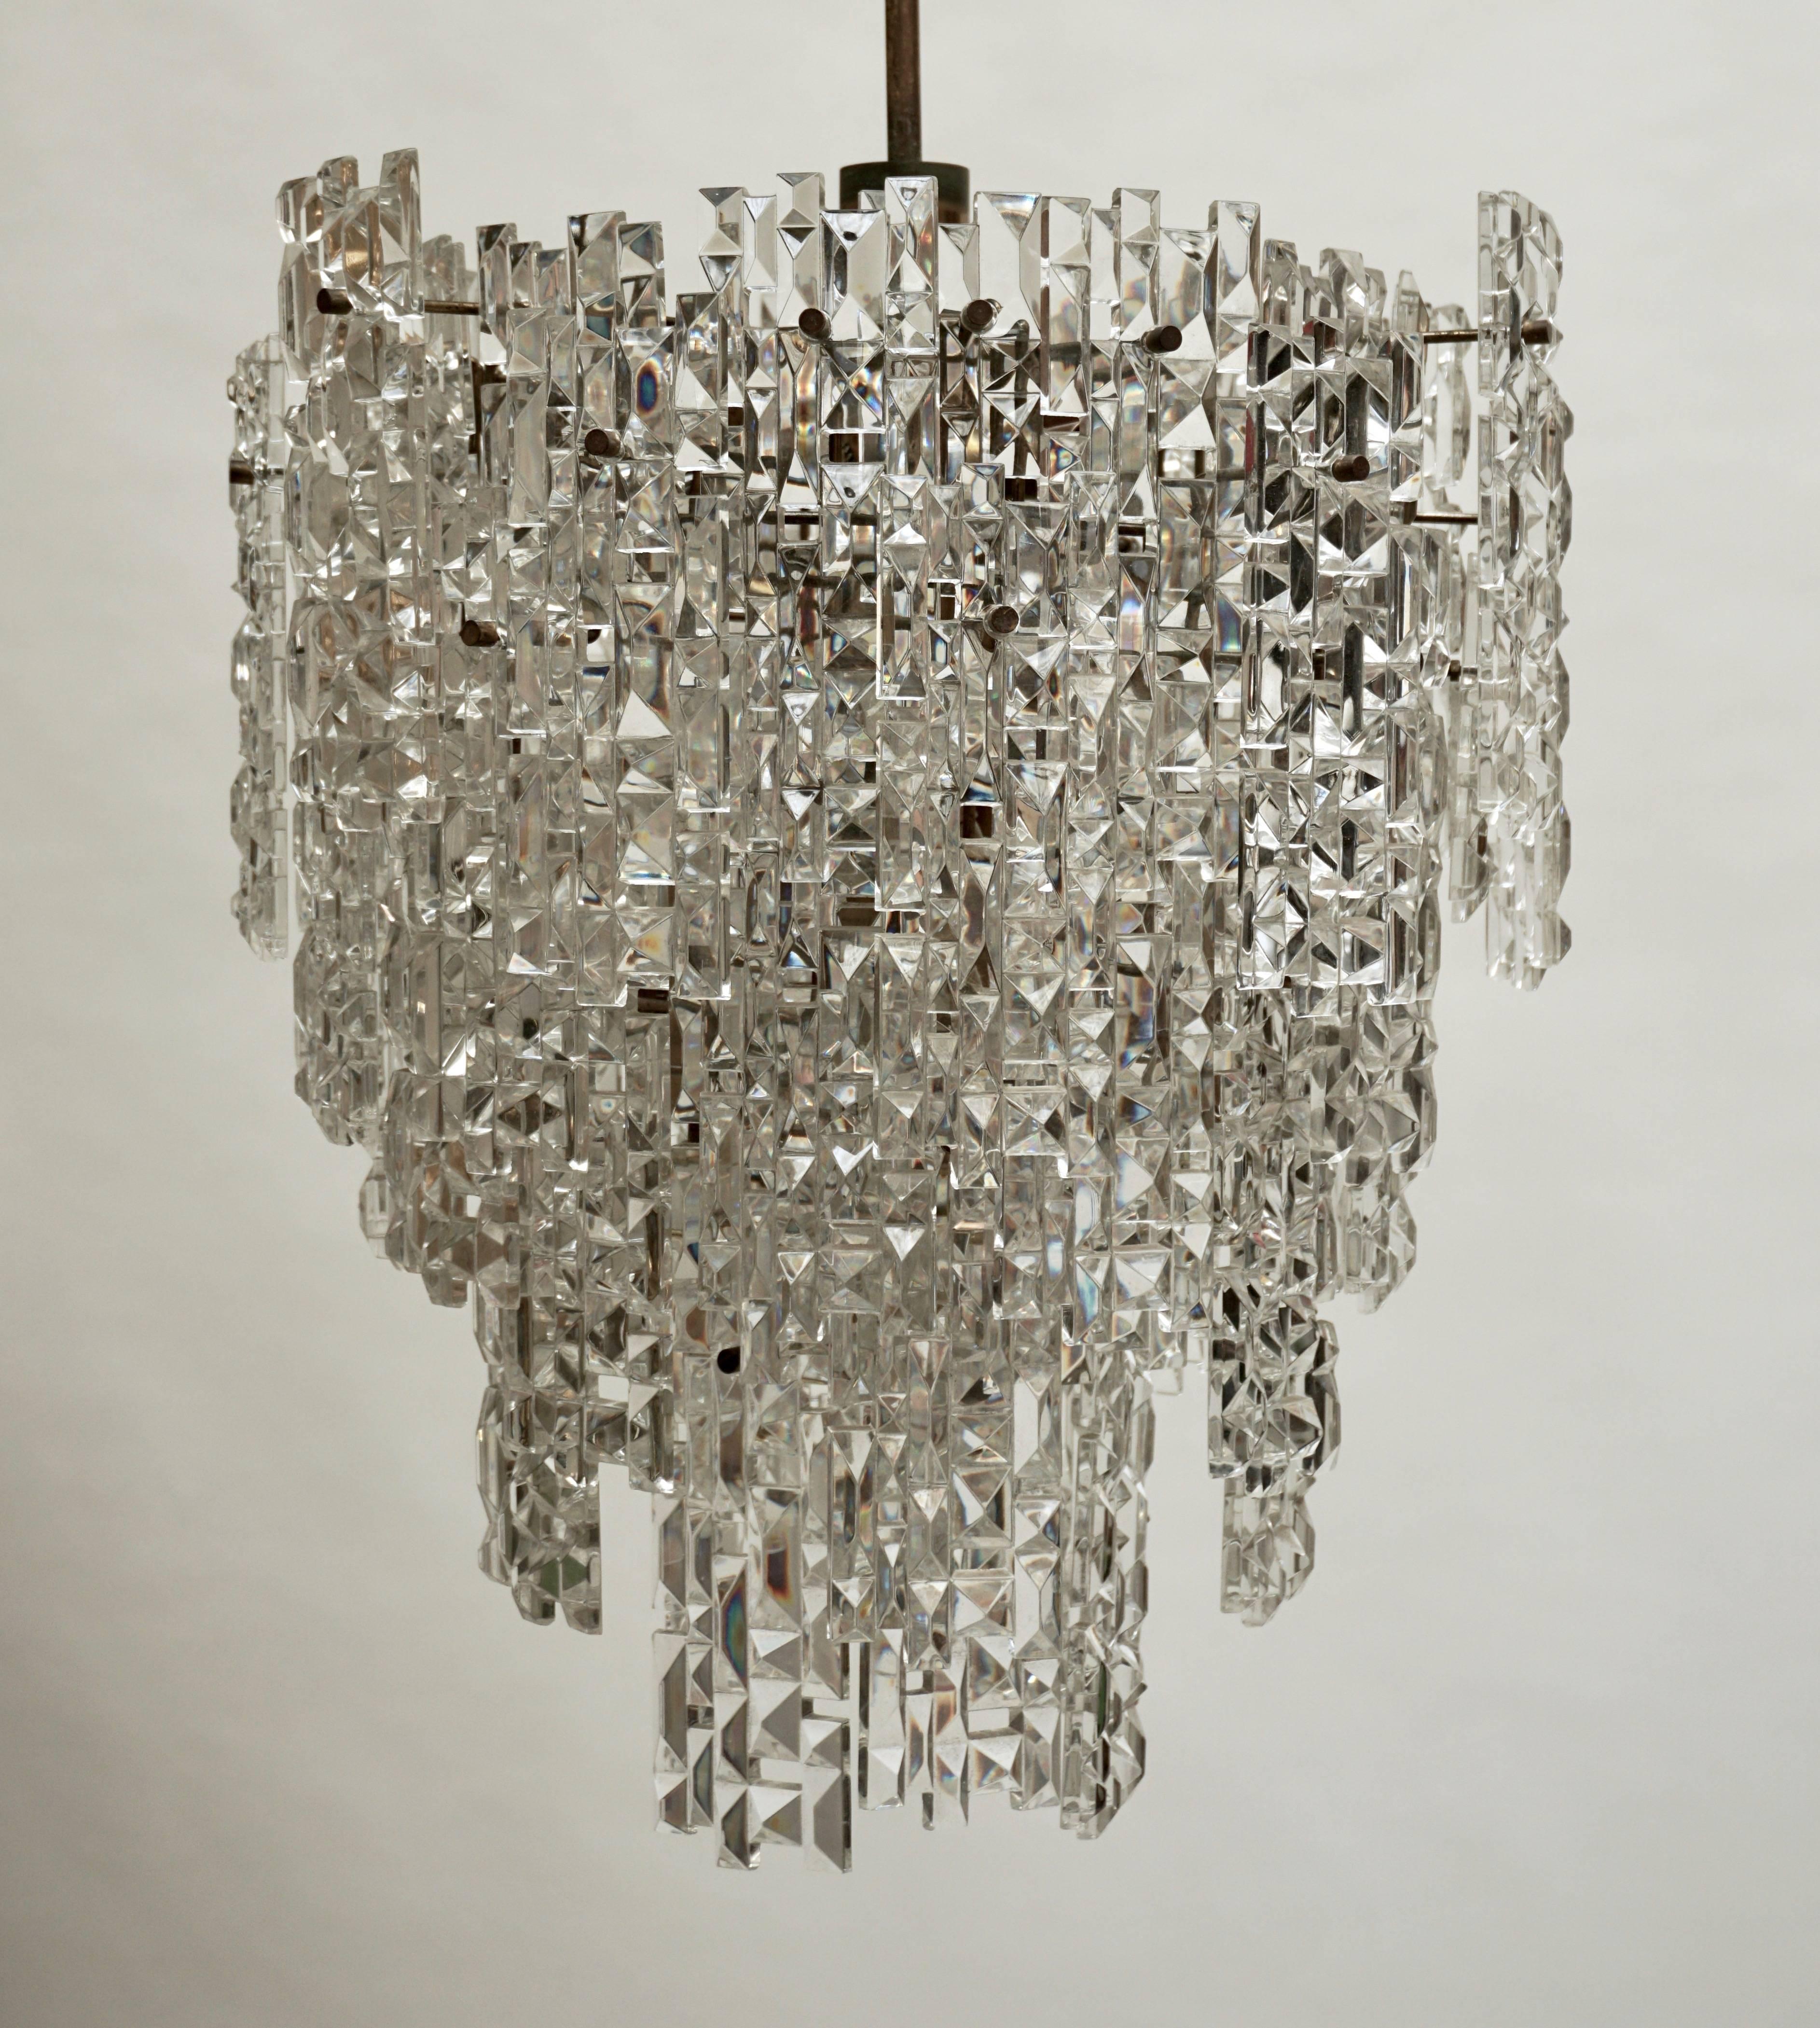 A magnificent modern crystal chandelier by Kinkeldey with 65 asymmetrically faceted crystals.
Stunning size and quality !
Nine E14 and one E27 bulbs.
Measures: Diameter 48 cm.
Height fixture 55 cm.
Total height 110 cm.